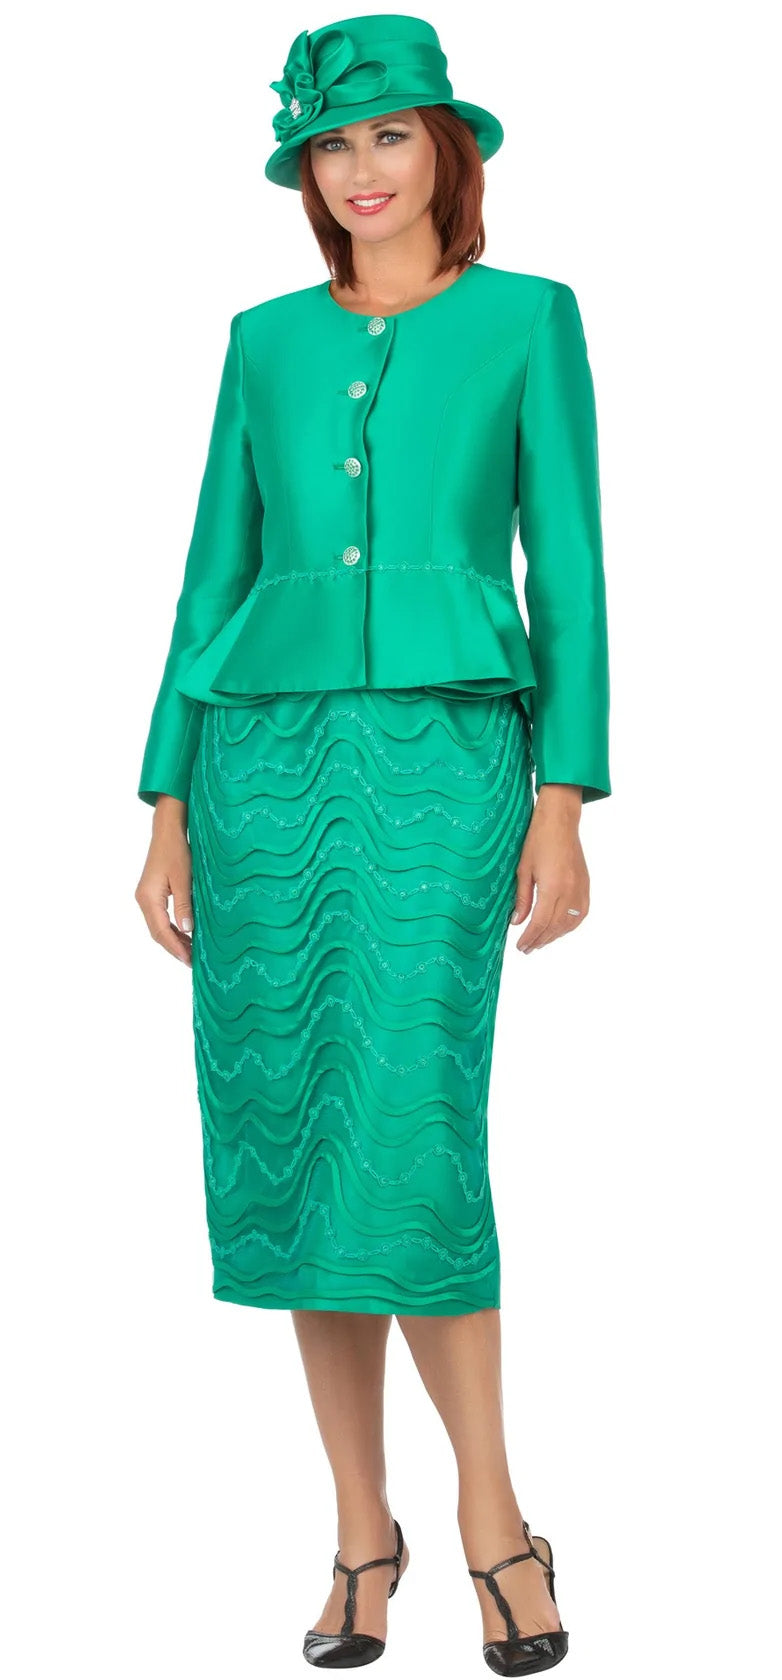 Giovanna Church Suit G1156-Emerald - Church Suits For Less